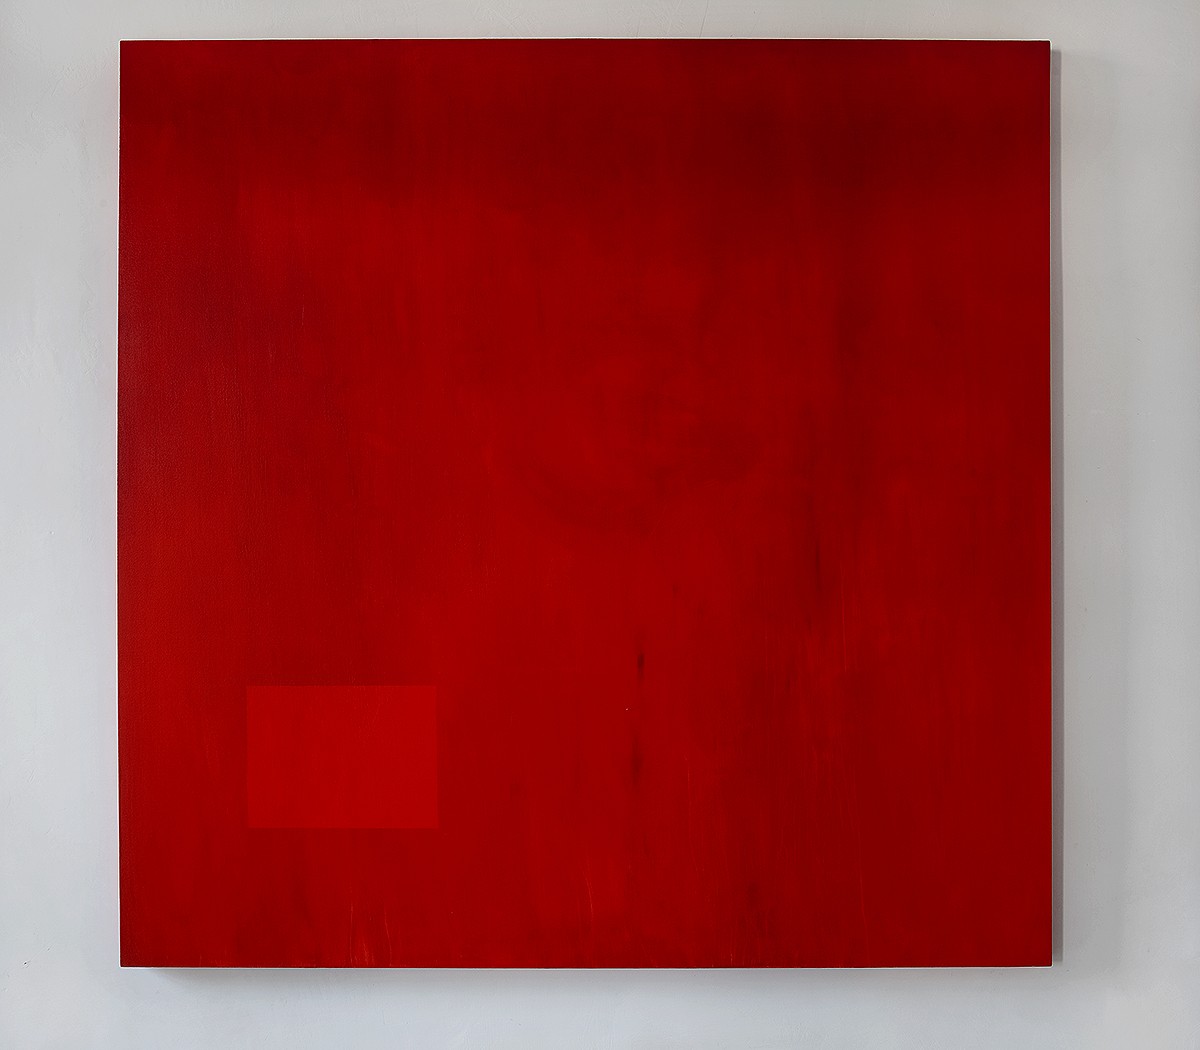 'Red Map I', 2011 Acrylic paint, mixed media on canvas 78.5 x 78.5 in.